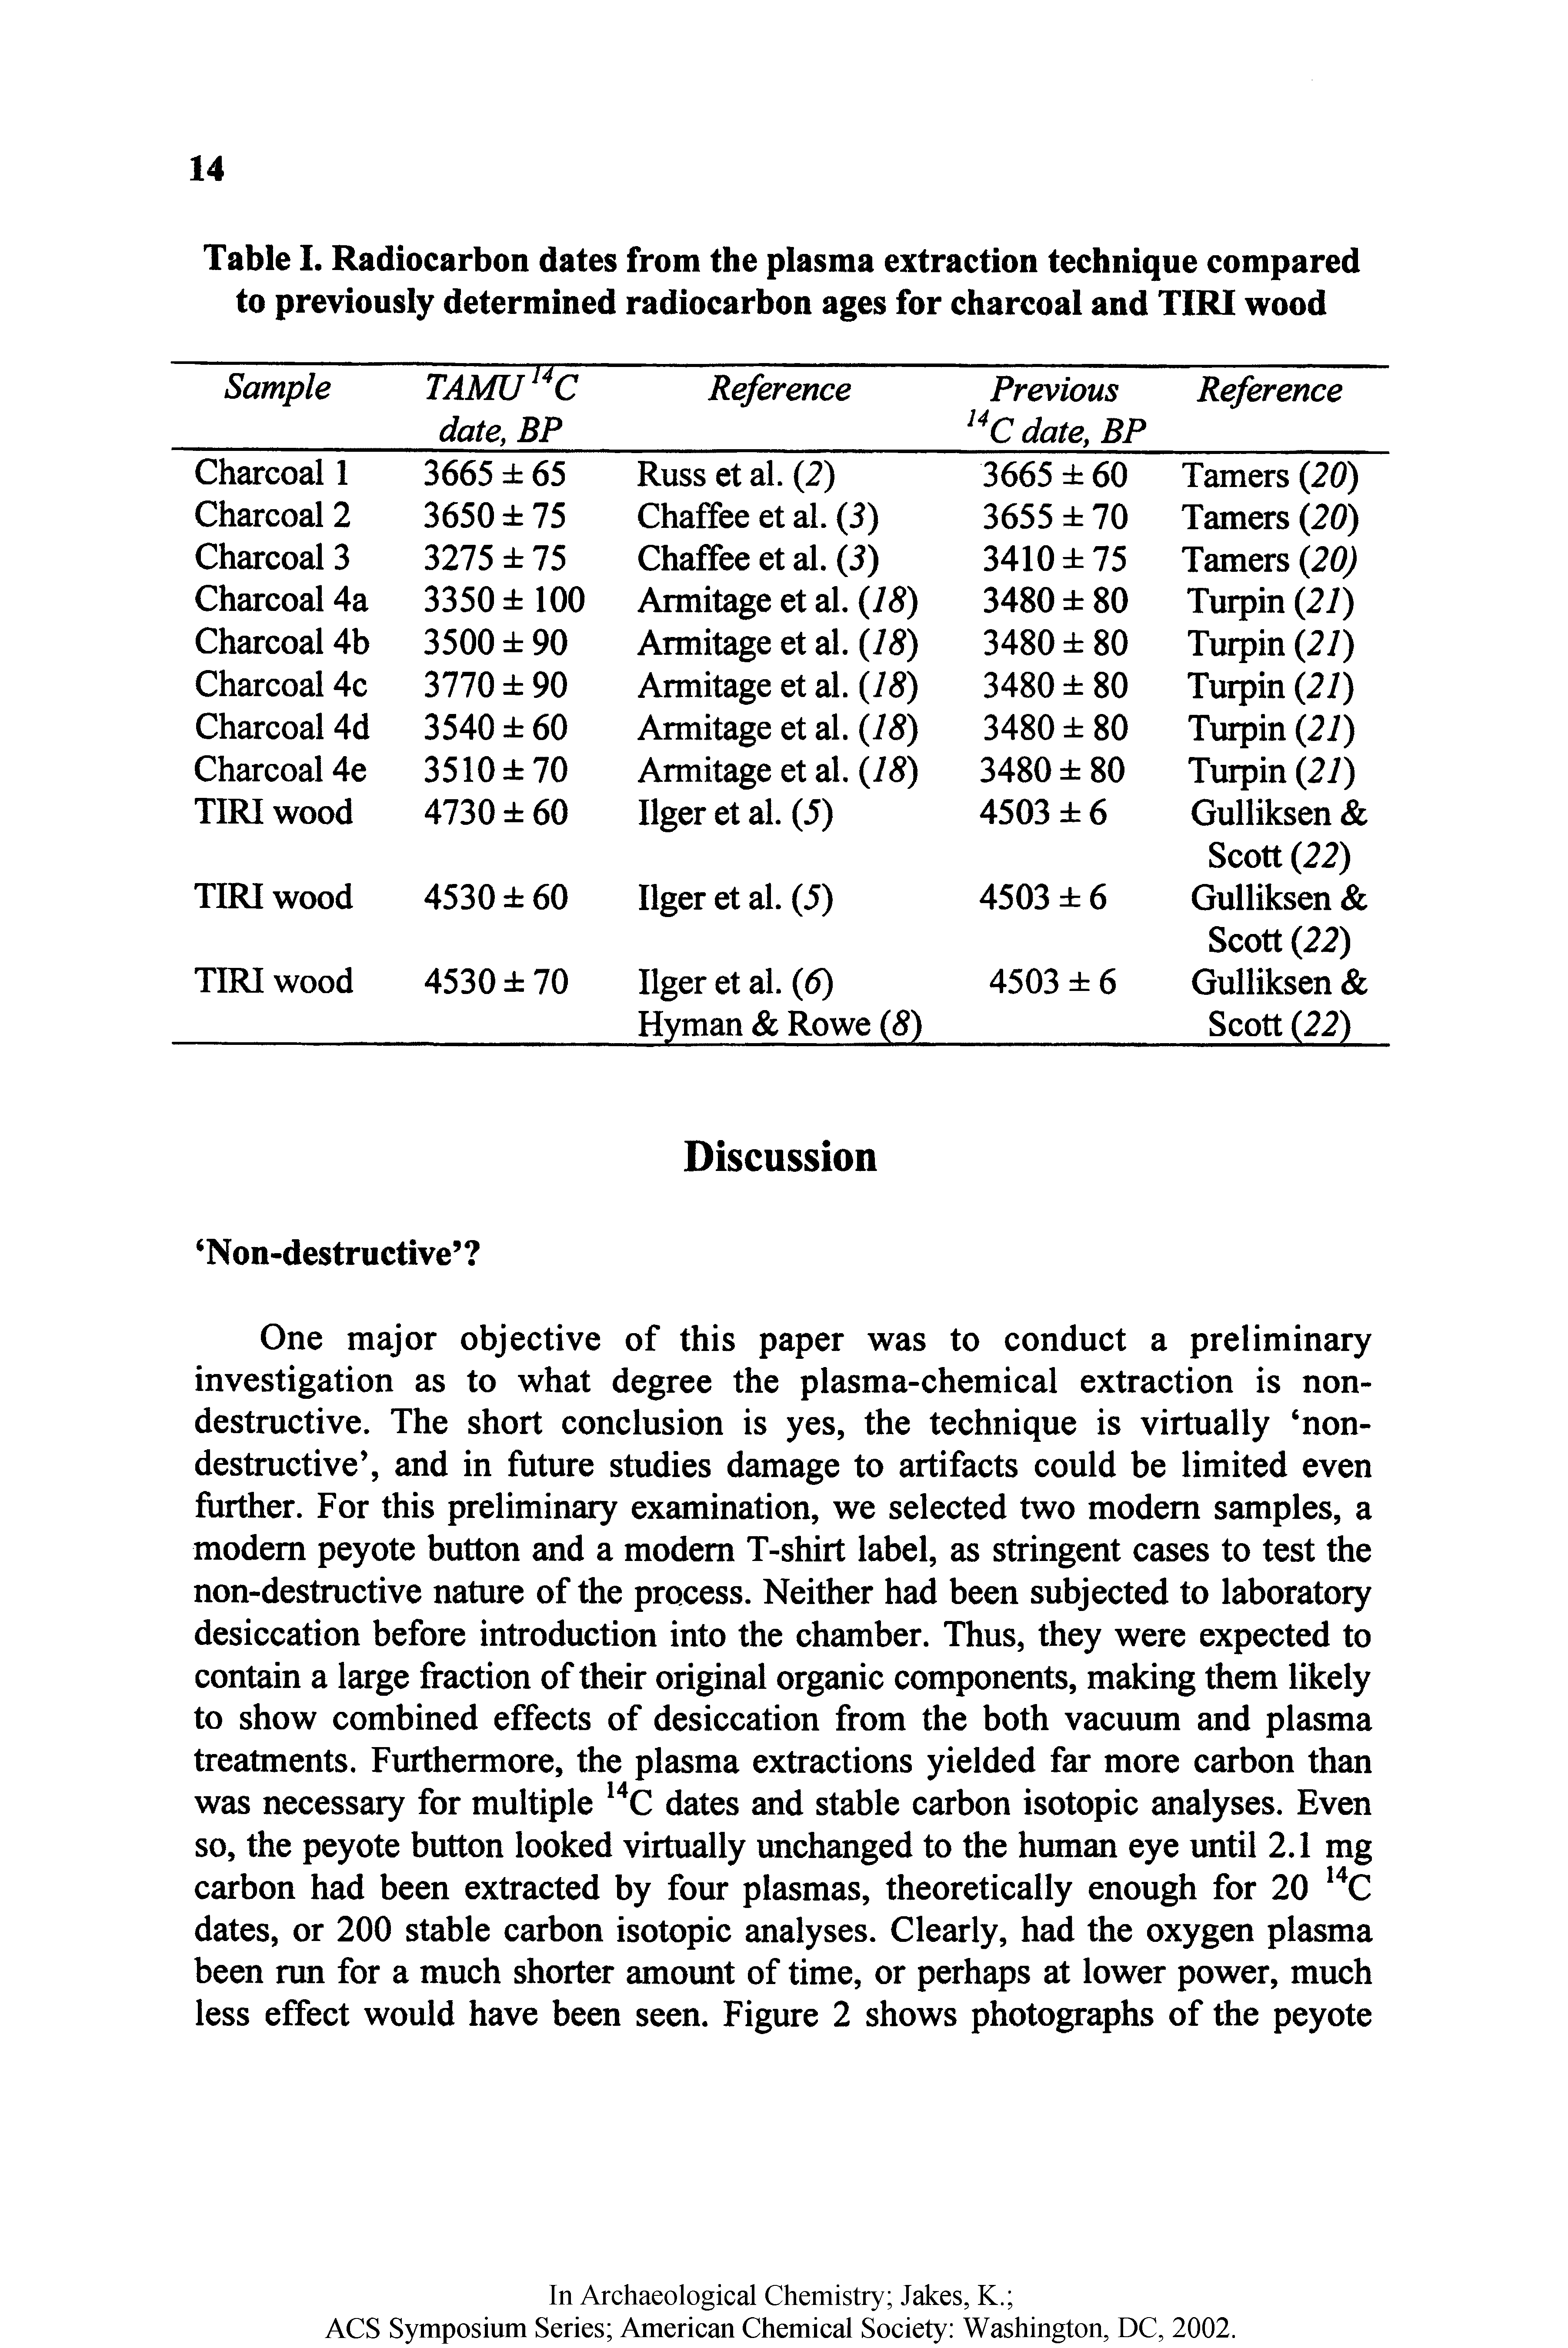 Table 1. Radiocarbon dates from the plasma extraction technique compared to previously determined radiocarbon ages for charcoal and TlRl wood...